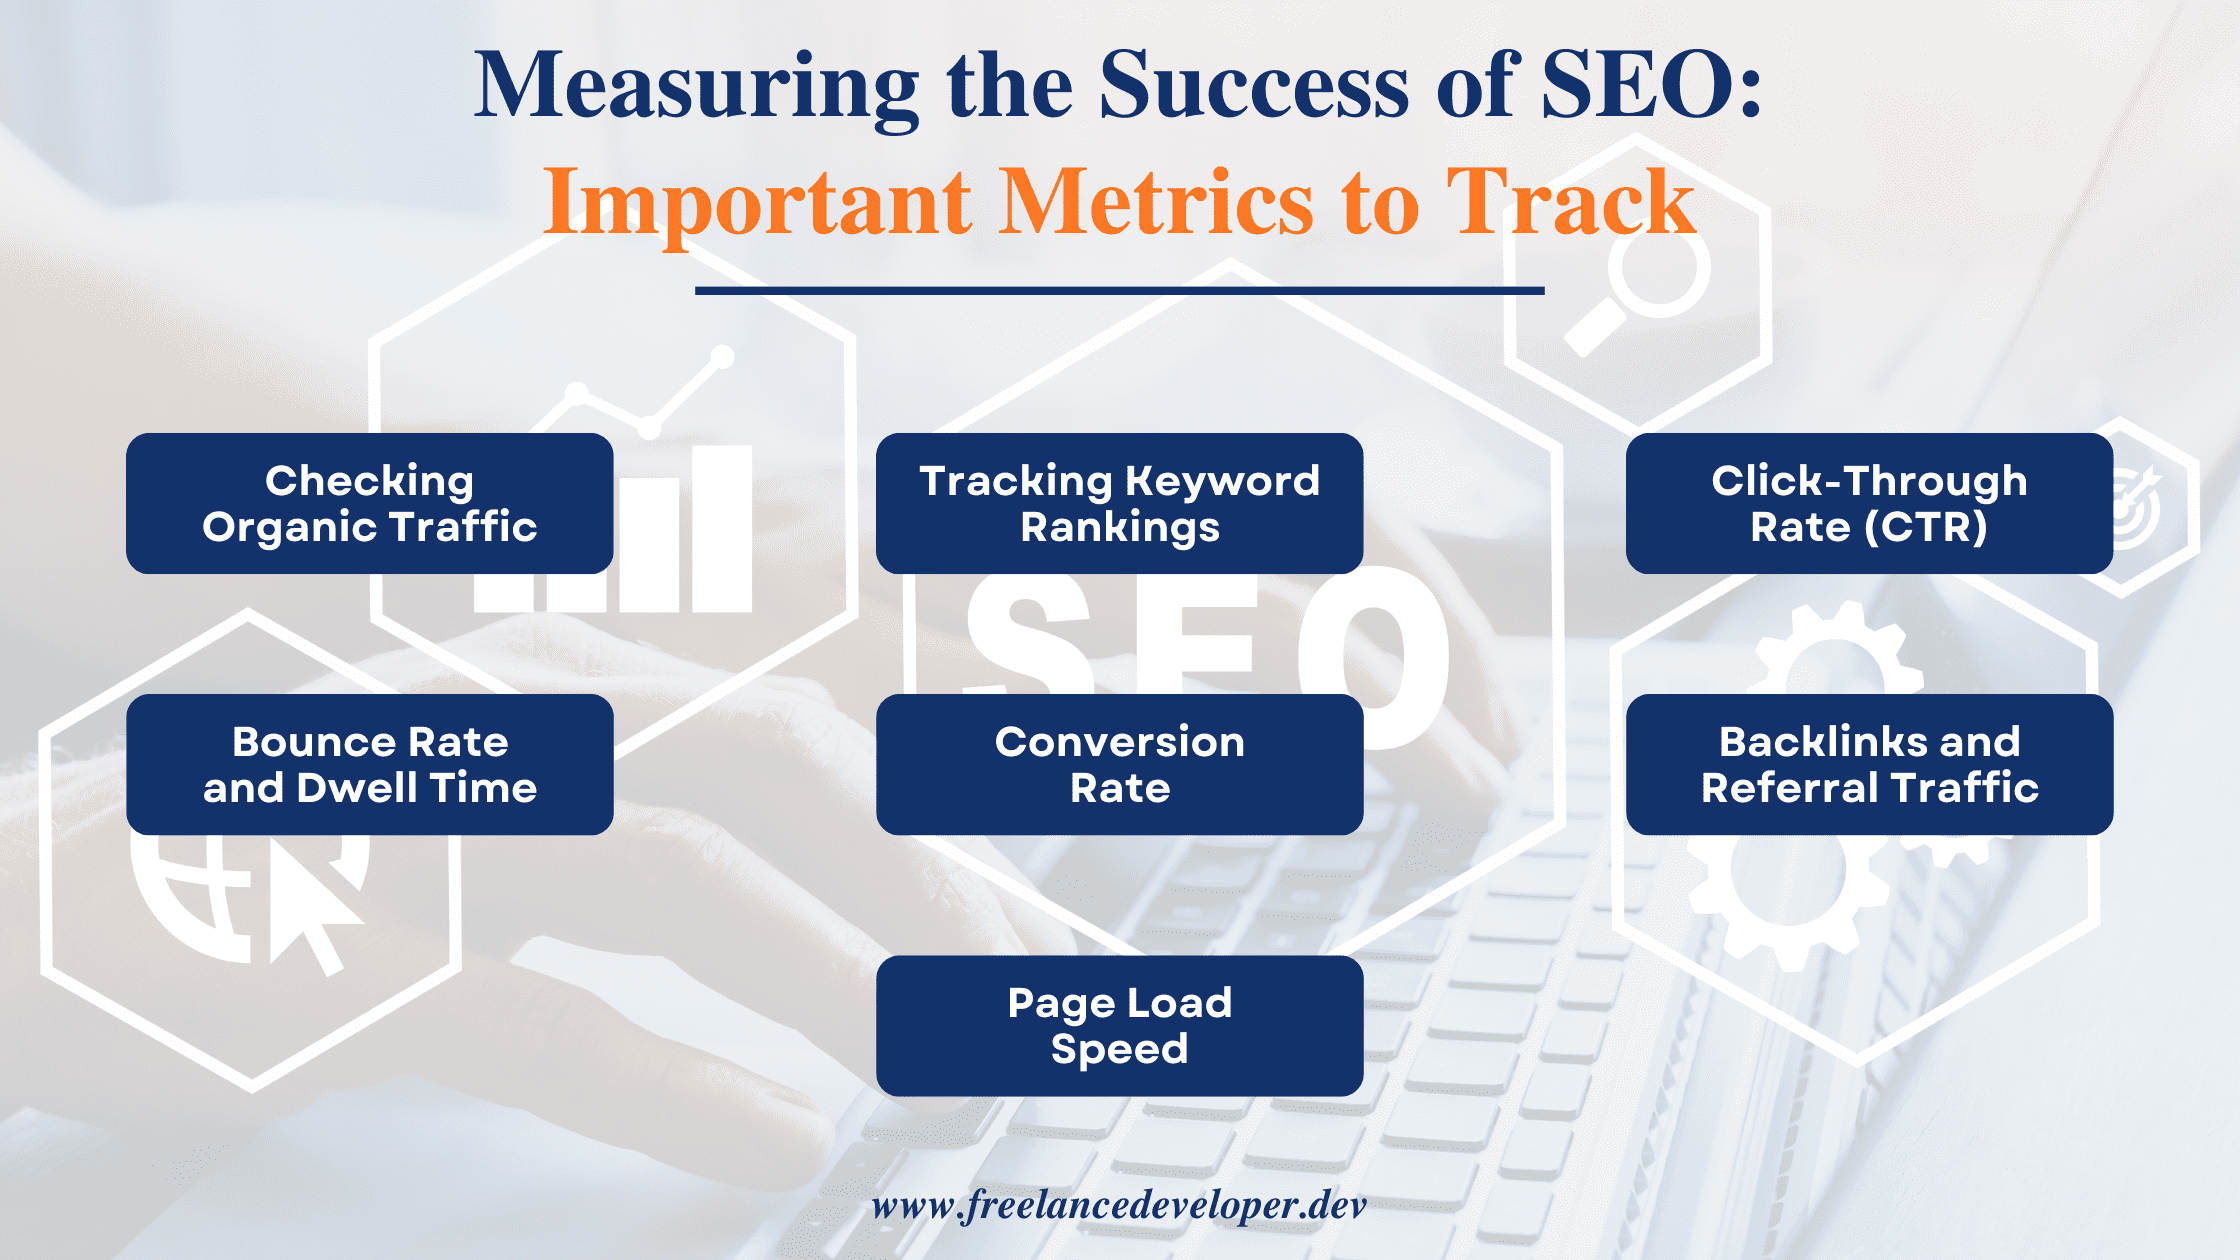 Measuring the Success of SEO Important Metrics to Track